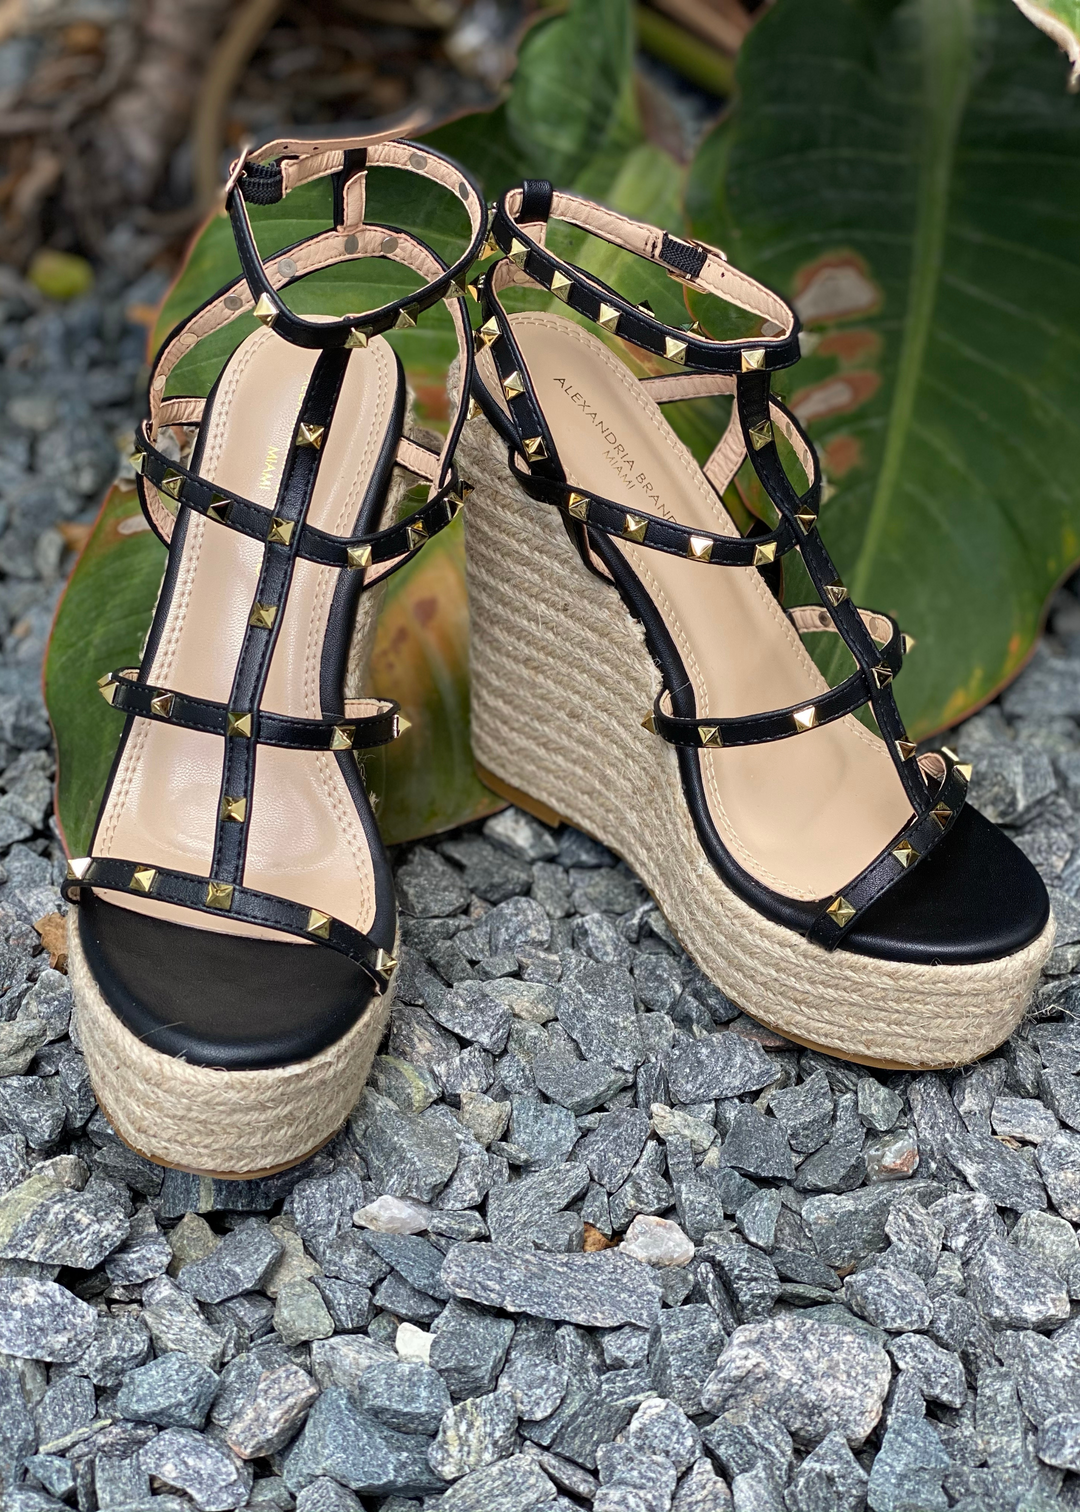 Women's black gold studded wedge heel with espadrille heel wedge. Black strappy wedge with gold studs